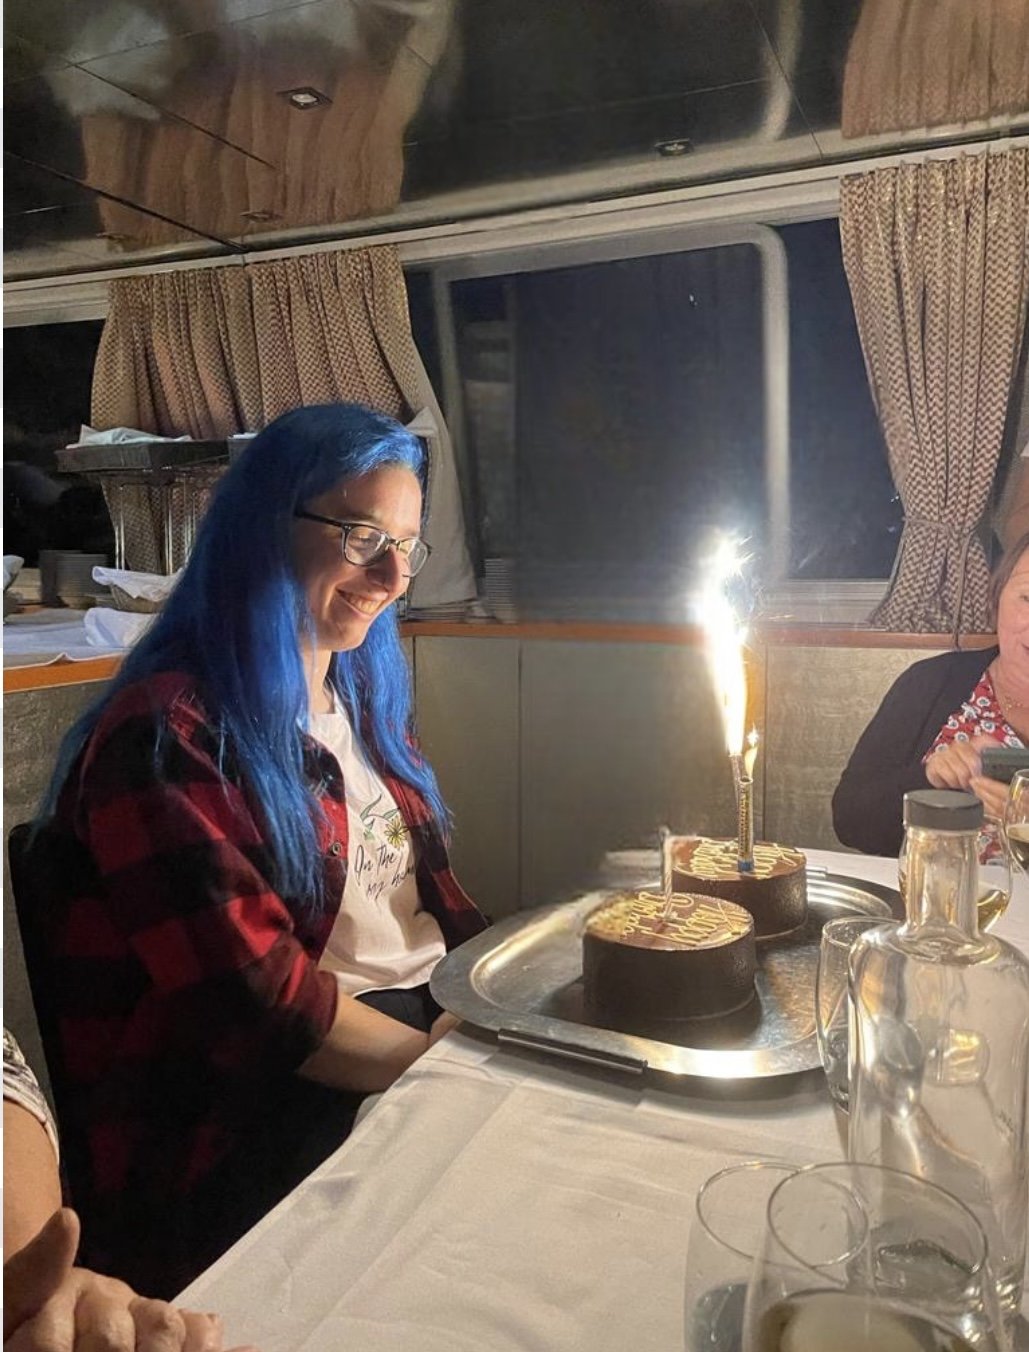 Chynna celebrating her birthday with a surprise cake from the chef (Chynna Jones/PA)